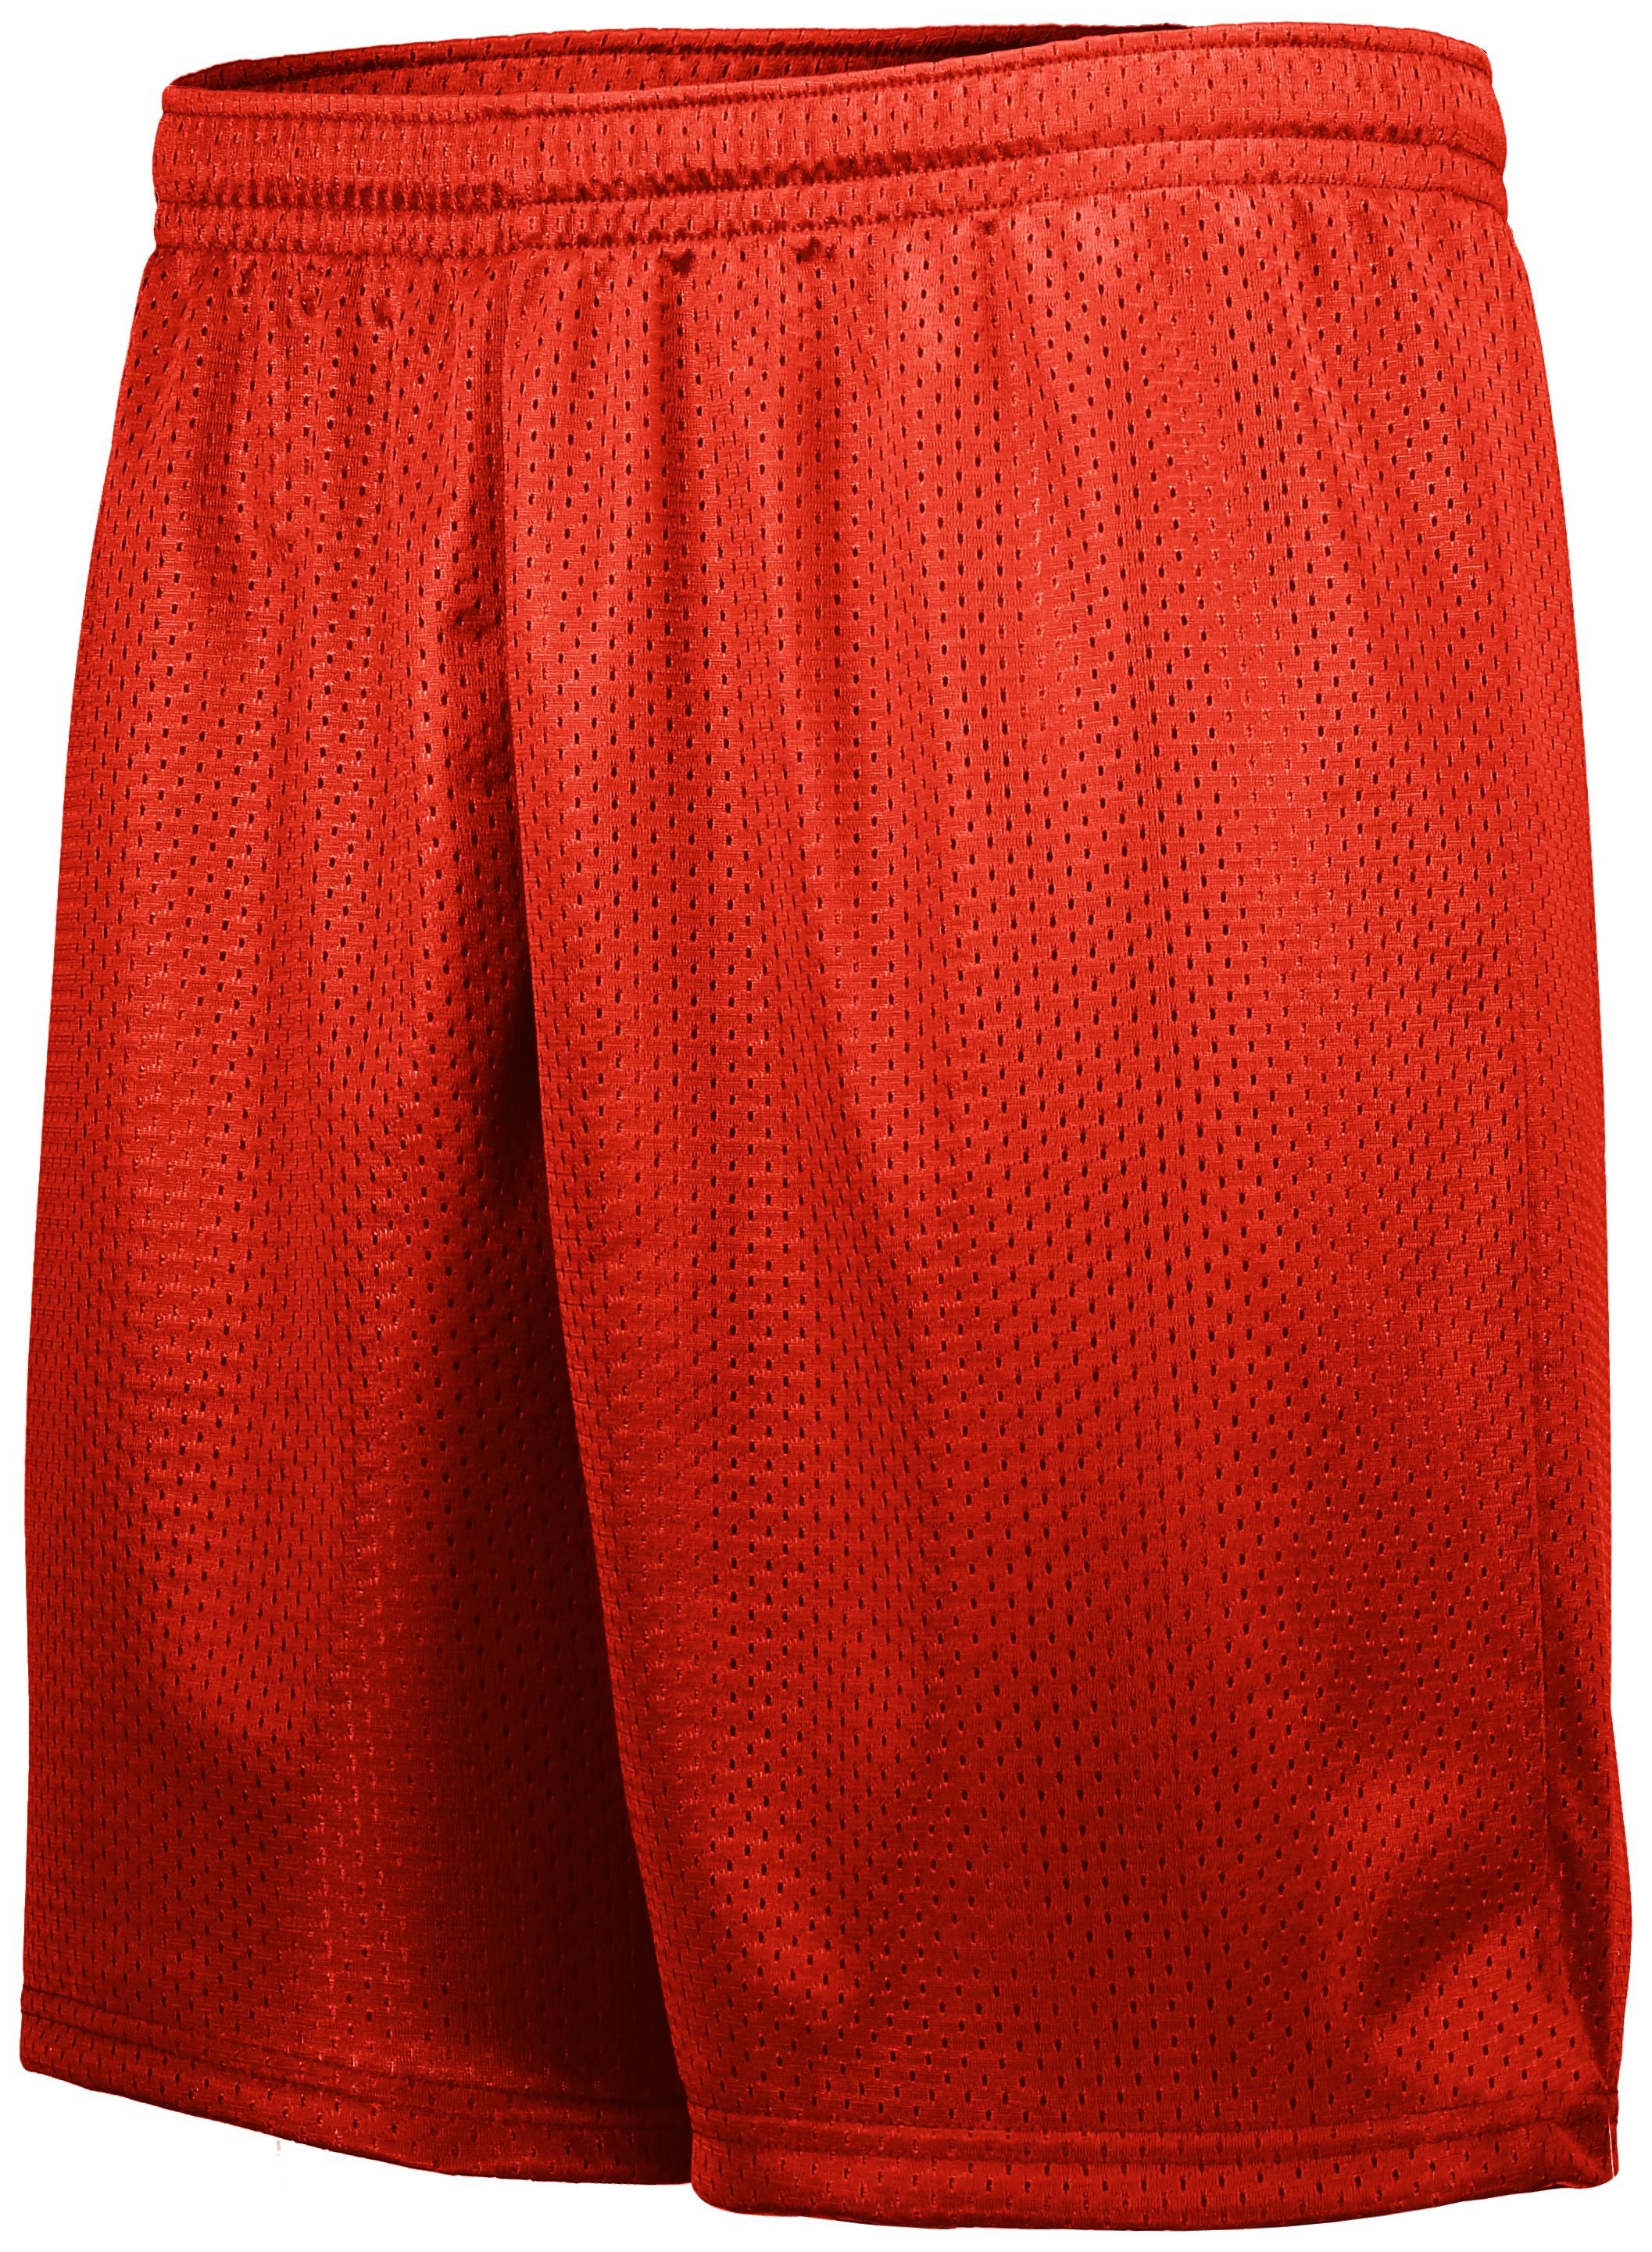 Augusta Sportswear Tricot Mesh Shorts in Orange  -Part of the Adult, Adult-Shorts, Augusta-Products product lines at KanaleyCreations.com